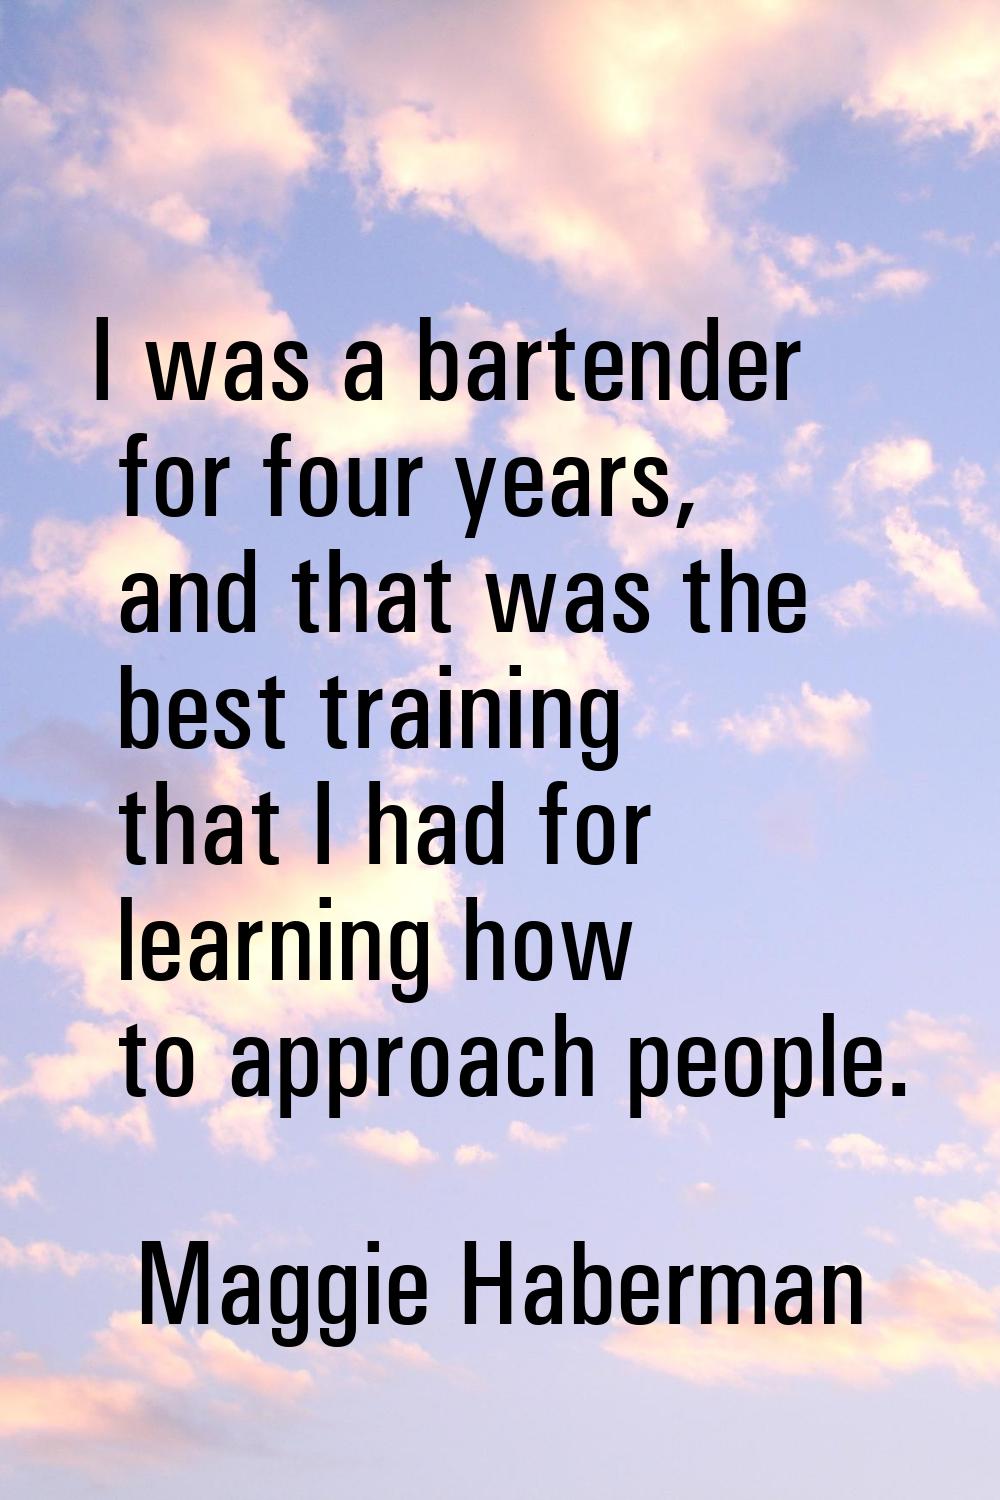 I was a bartender for four years, and that was the best training that I had for learning how to app